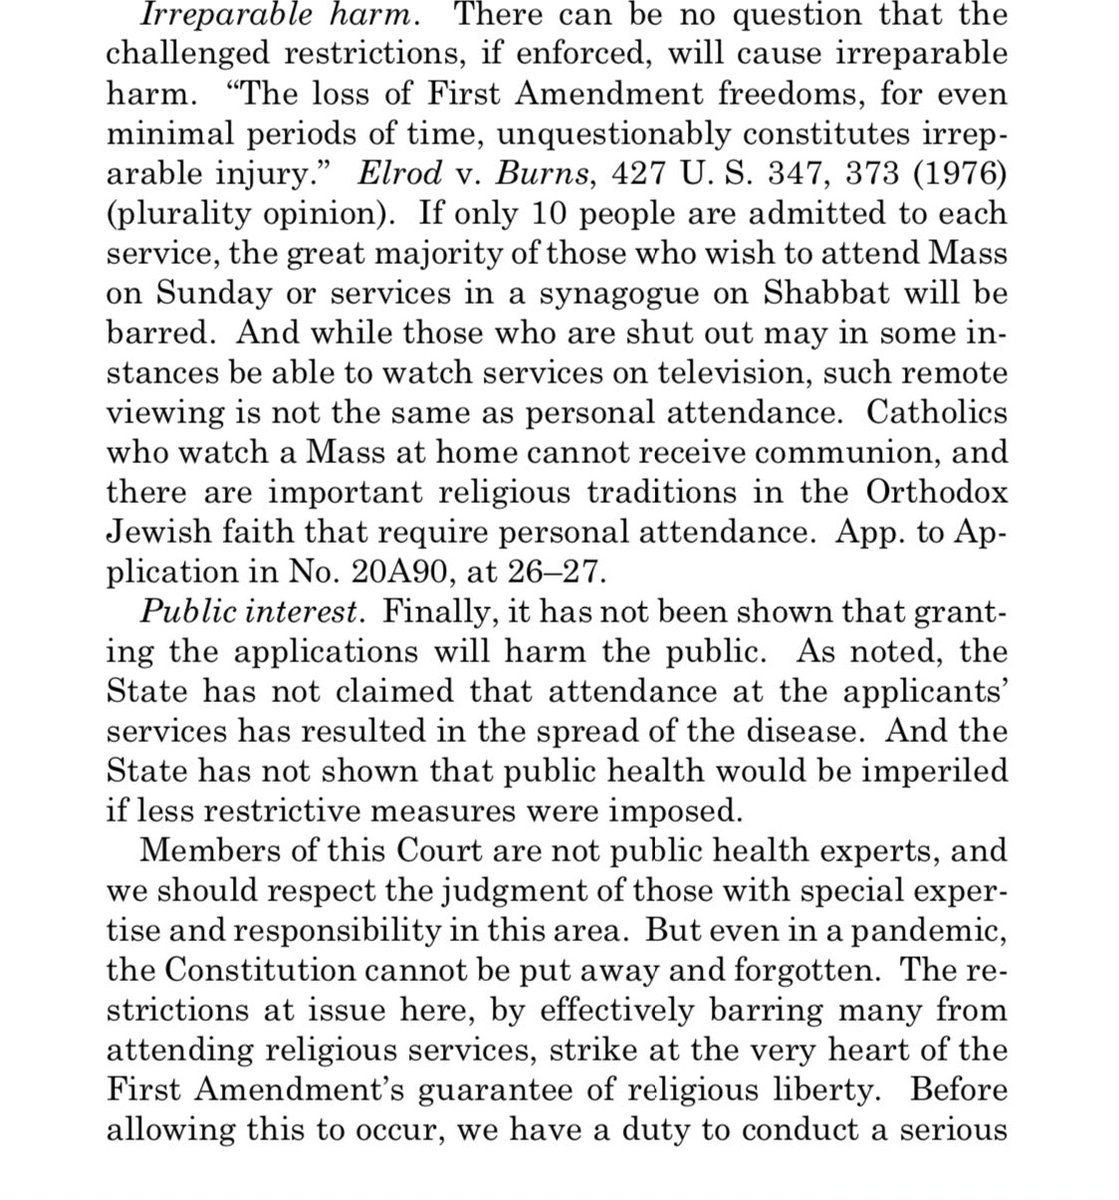 JUST IN: U.S. Supreme Court sides with Catholics/Jews in case against NY Gov. Cuomo’s order restricting public gatherings.“In a red zone, while a synagogue or church may not admit more than 10 persons, businesses categorized as ‘essential’ may admit as many people as they wish.”